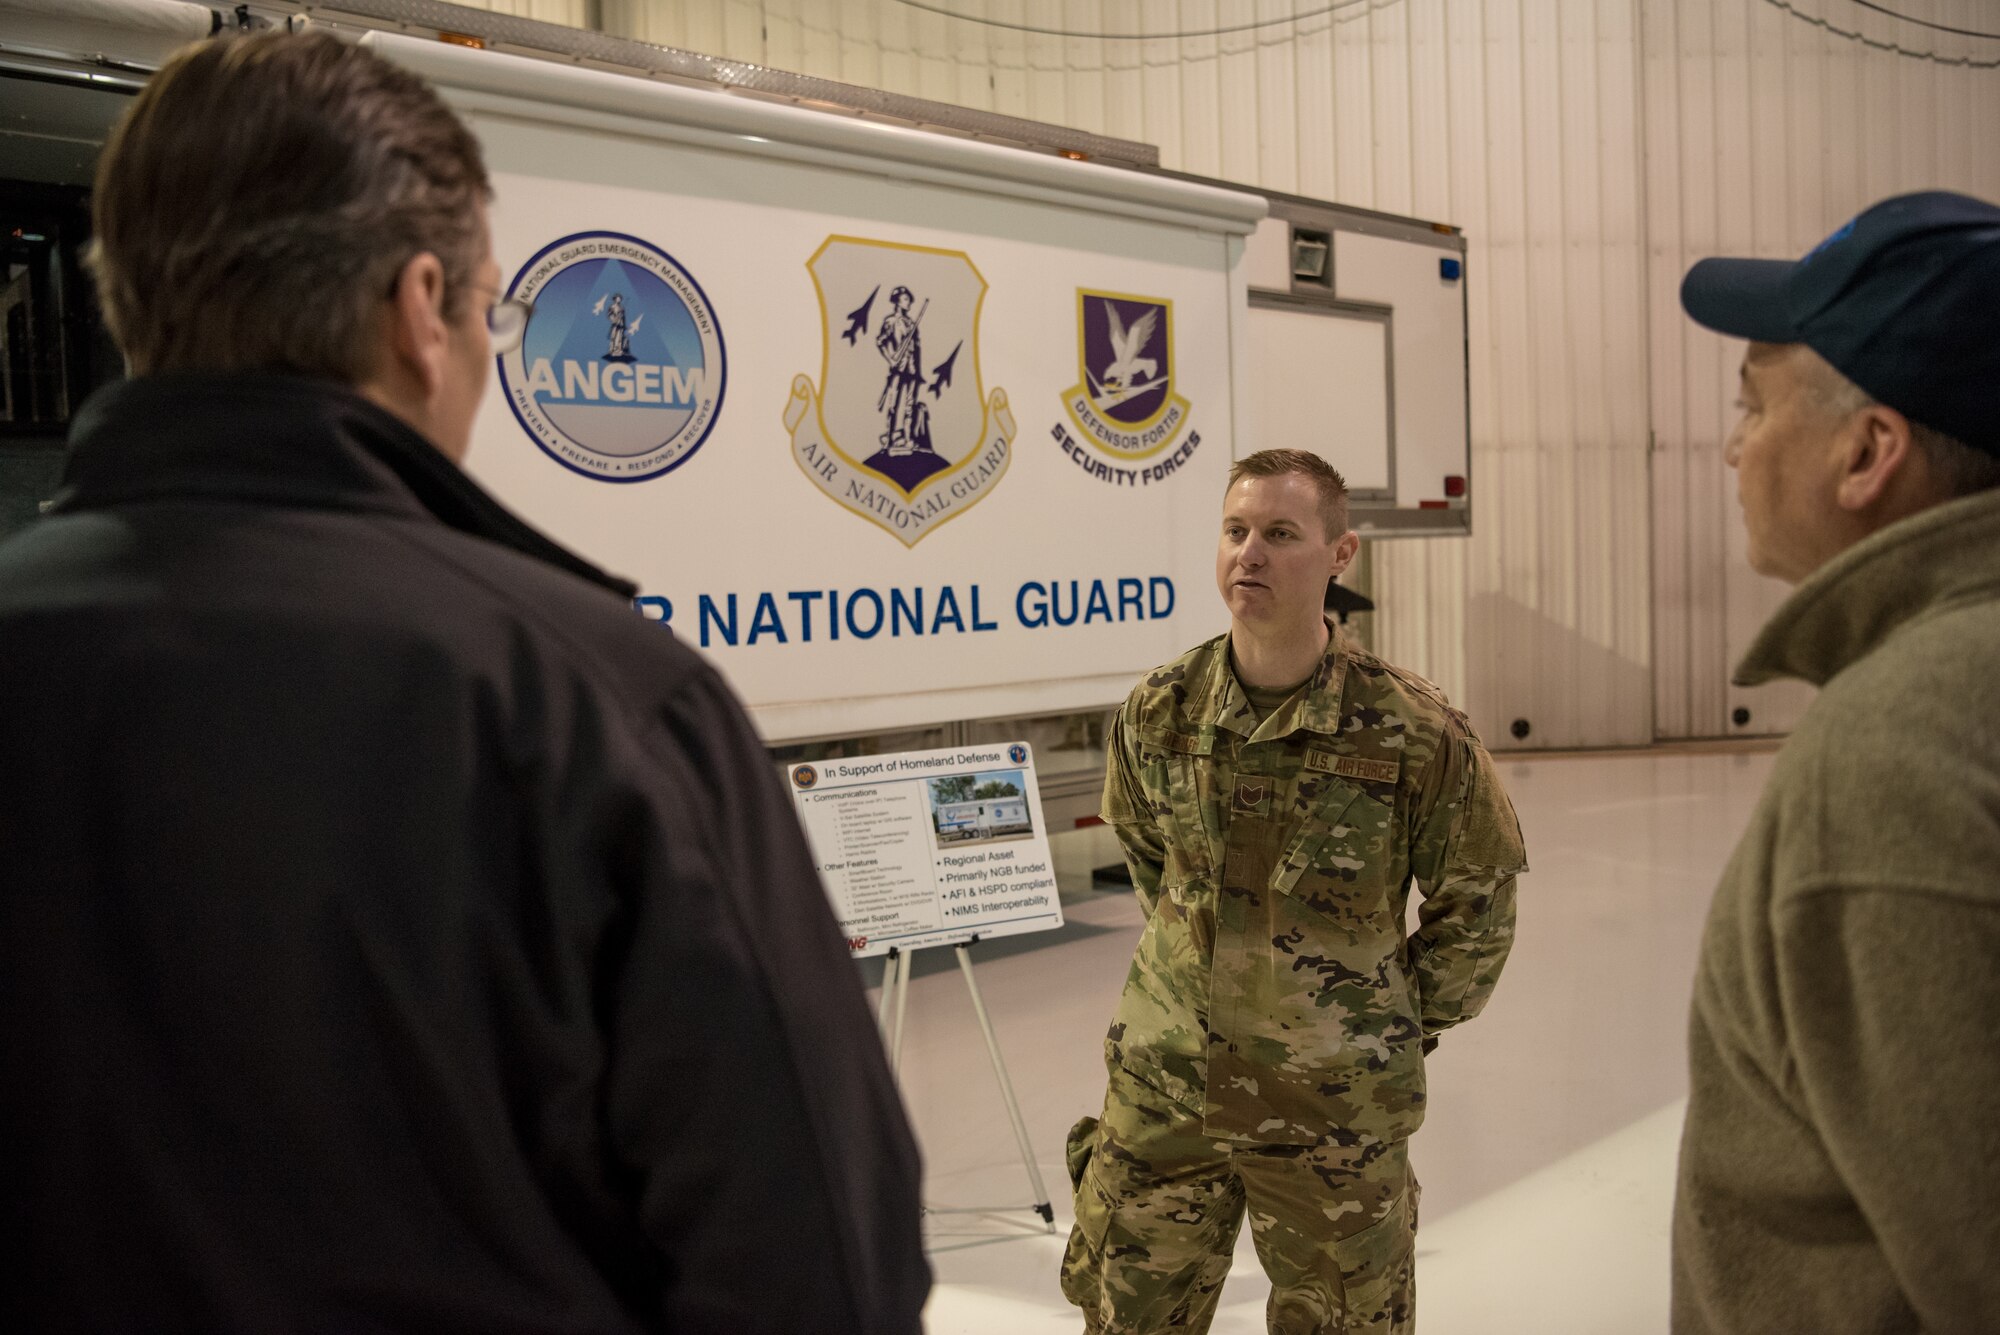 Tech. Sgt. Kaleb Henry, readinesss program specialist for the 123rd Mission Support Group, briefs the functions of a Mobile Emergency Operations Center to civilian employers at the Kentucky Air National Guard Base in Louisville, Ky., March 15, 2019. The employers were participating in an Employer Support of the Guard and Reserve “Bosslift,” which enhances awareness and understanding between National Guardsmen and the civilian employers for whom they work when they’re not on duty. (U.S. Air National Guard photo by Staff Sgt. Joshua Horton)